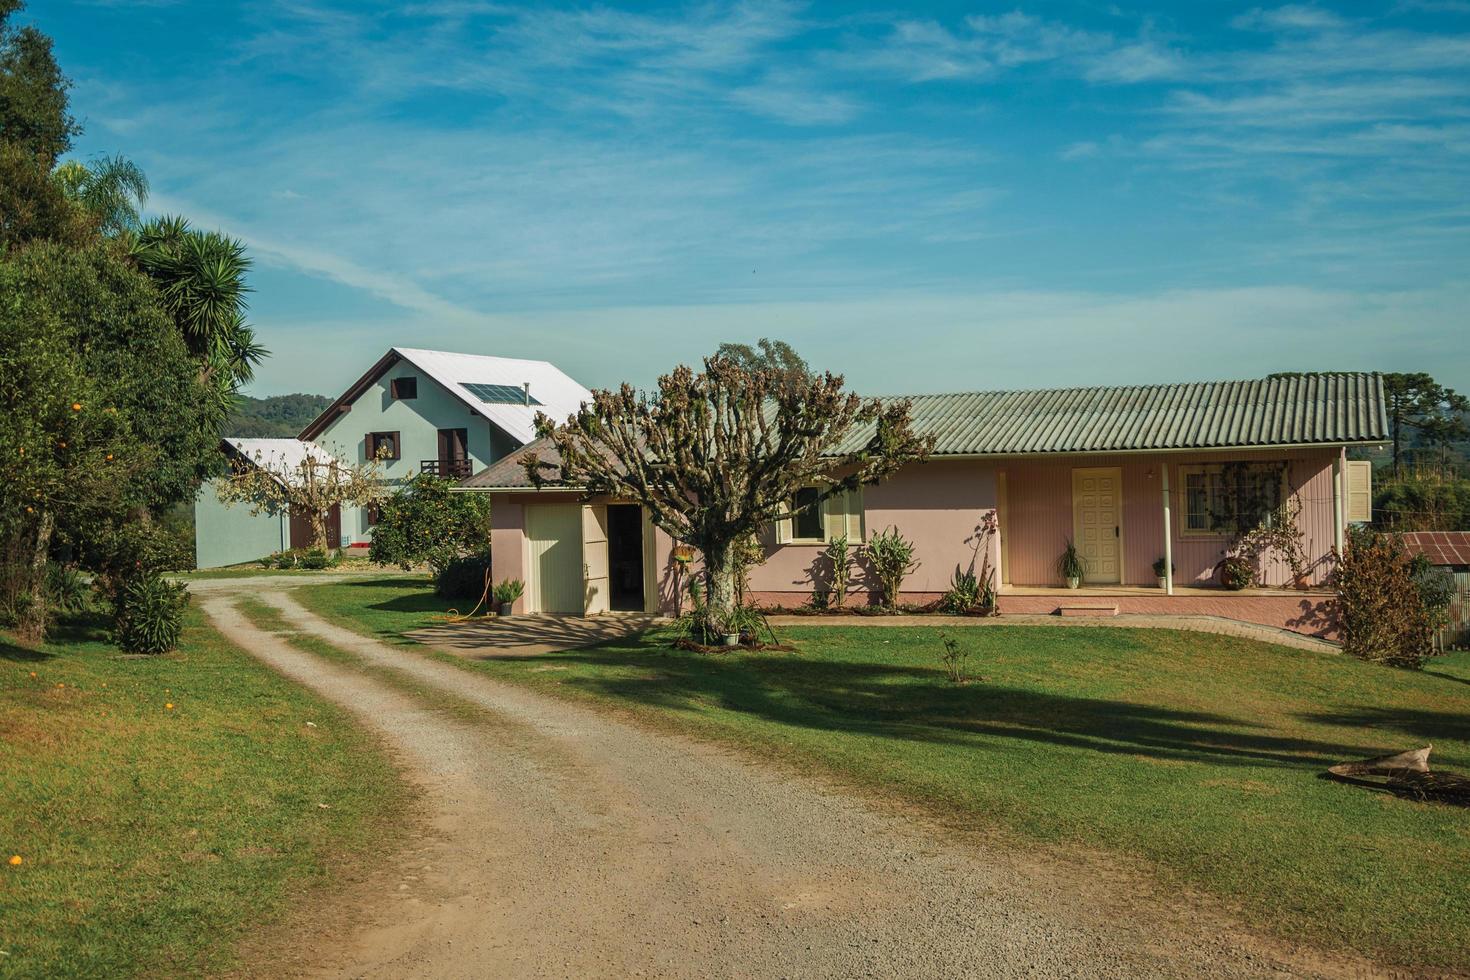 Bento Goncalves, Brazil - July 12, 2019. Charming modern country house with pathway and a lush garden, in a rural landscape near Bento Goncalves. photo